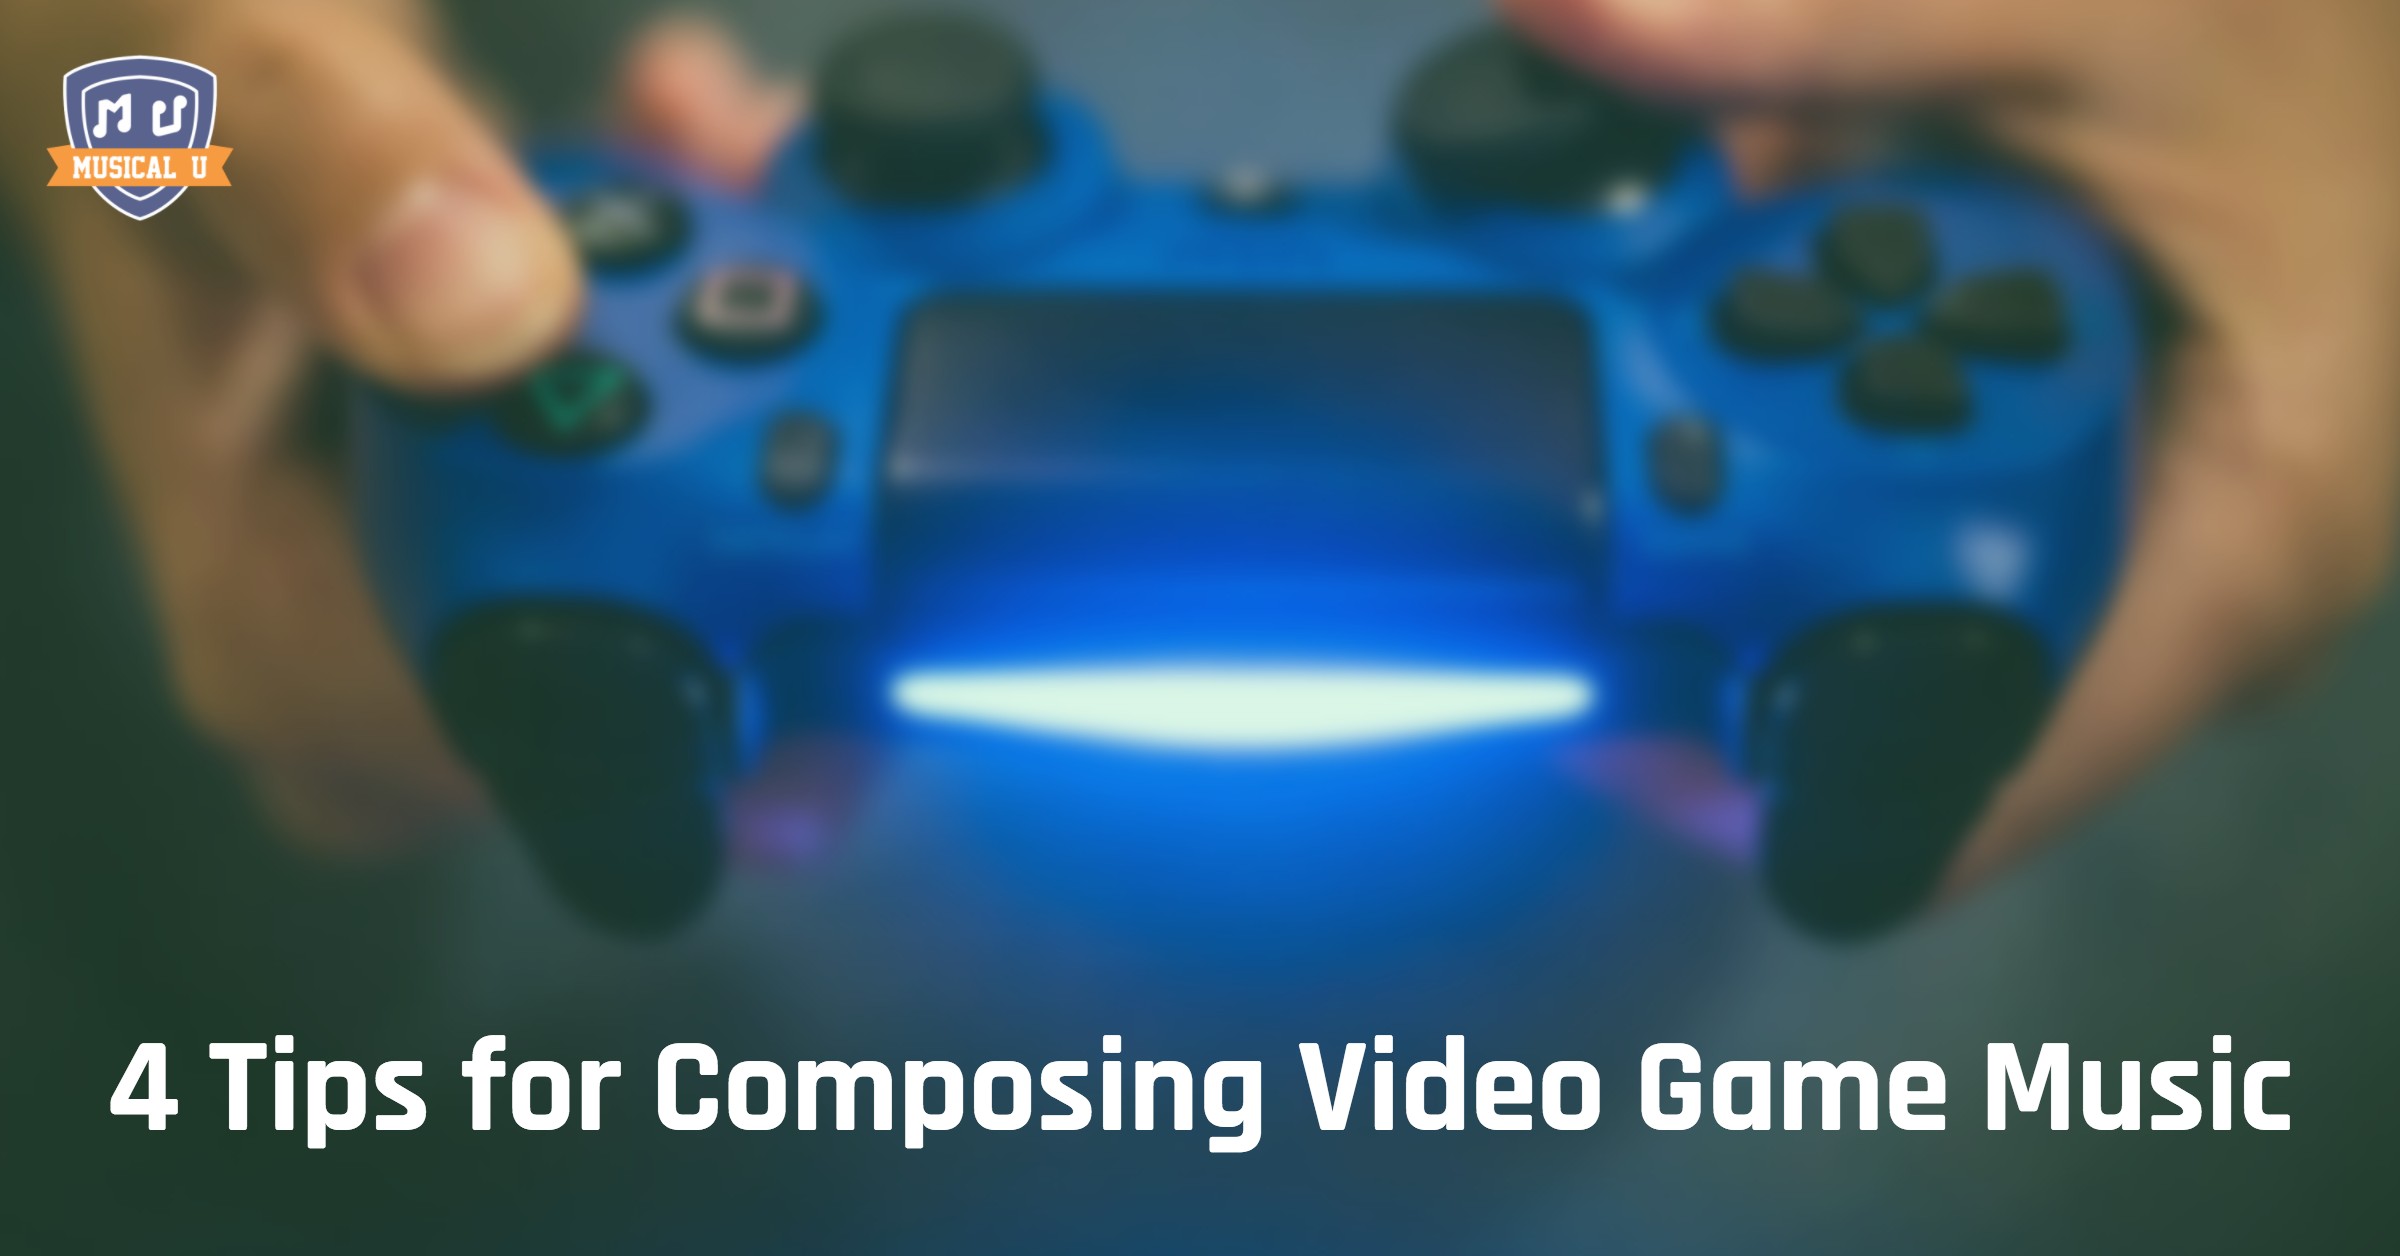 4 Tips for Composing Video Game Music - Musical U